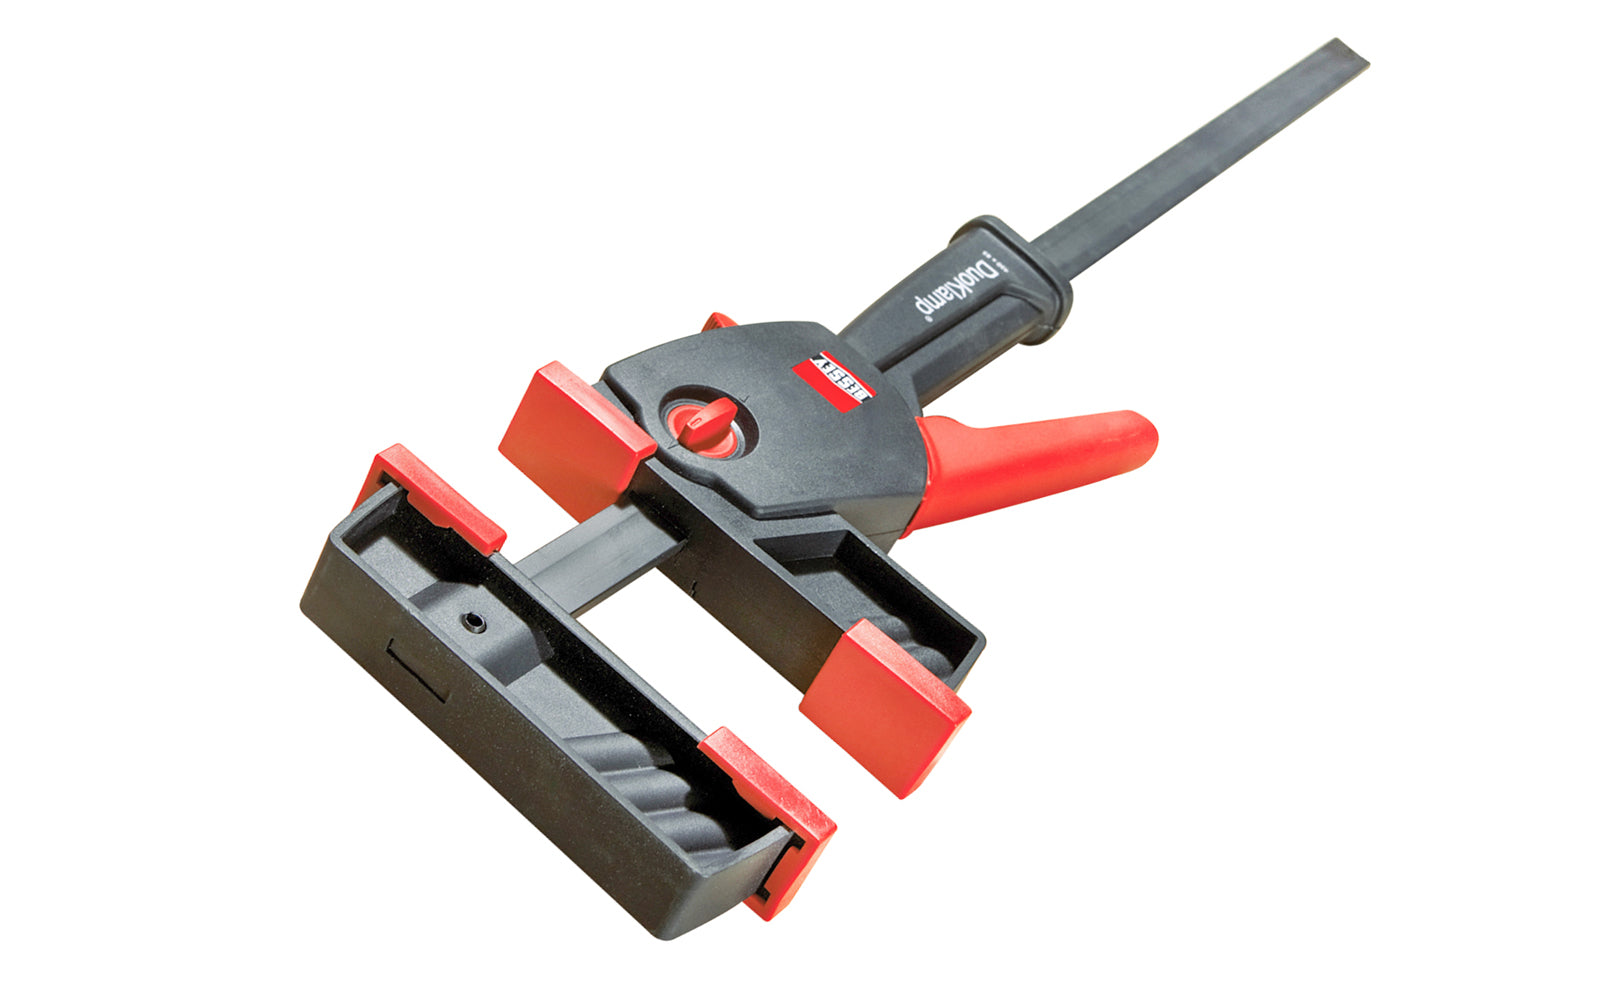 Bessey 18" DuoKlamp Clamp ~ DUO45-8 - One handed clamp & spreader. Clamp or spread with the turn of a button, no tools necessary. 18" max opening & 3-1/4" deep throat. Jaws resist flex & withstand up to 260 lb. of clamping force. Soft pressure caps prevent marring of wood by distributing pressure over a greater area.  